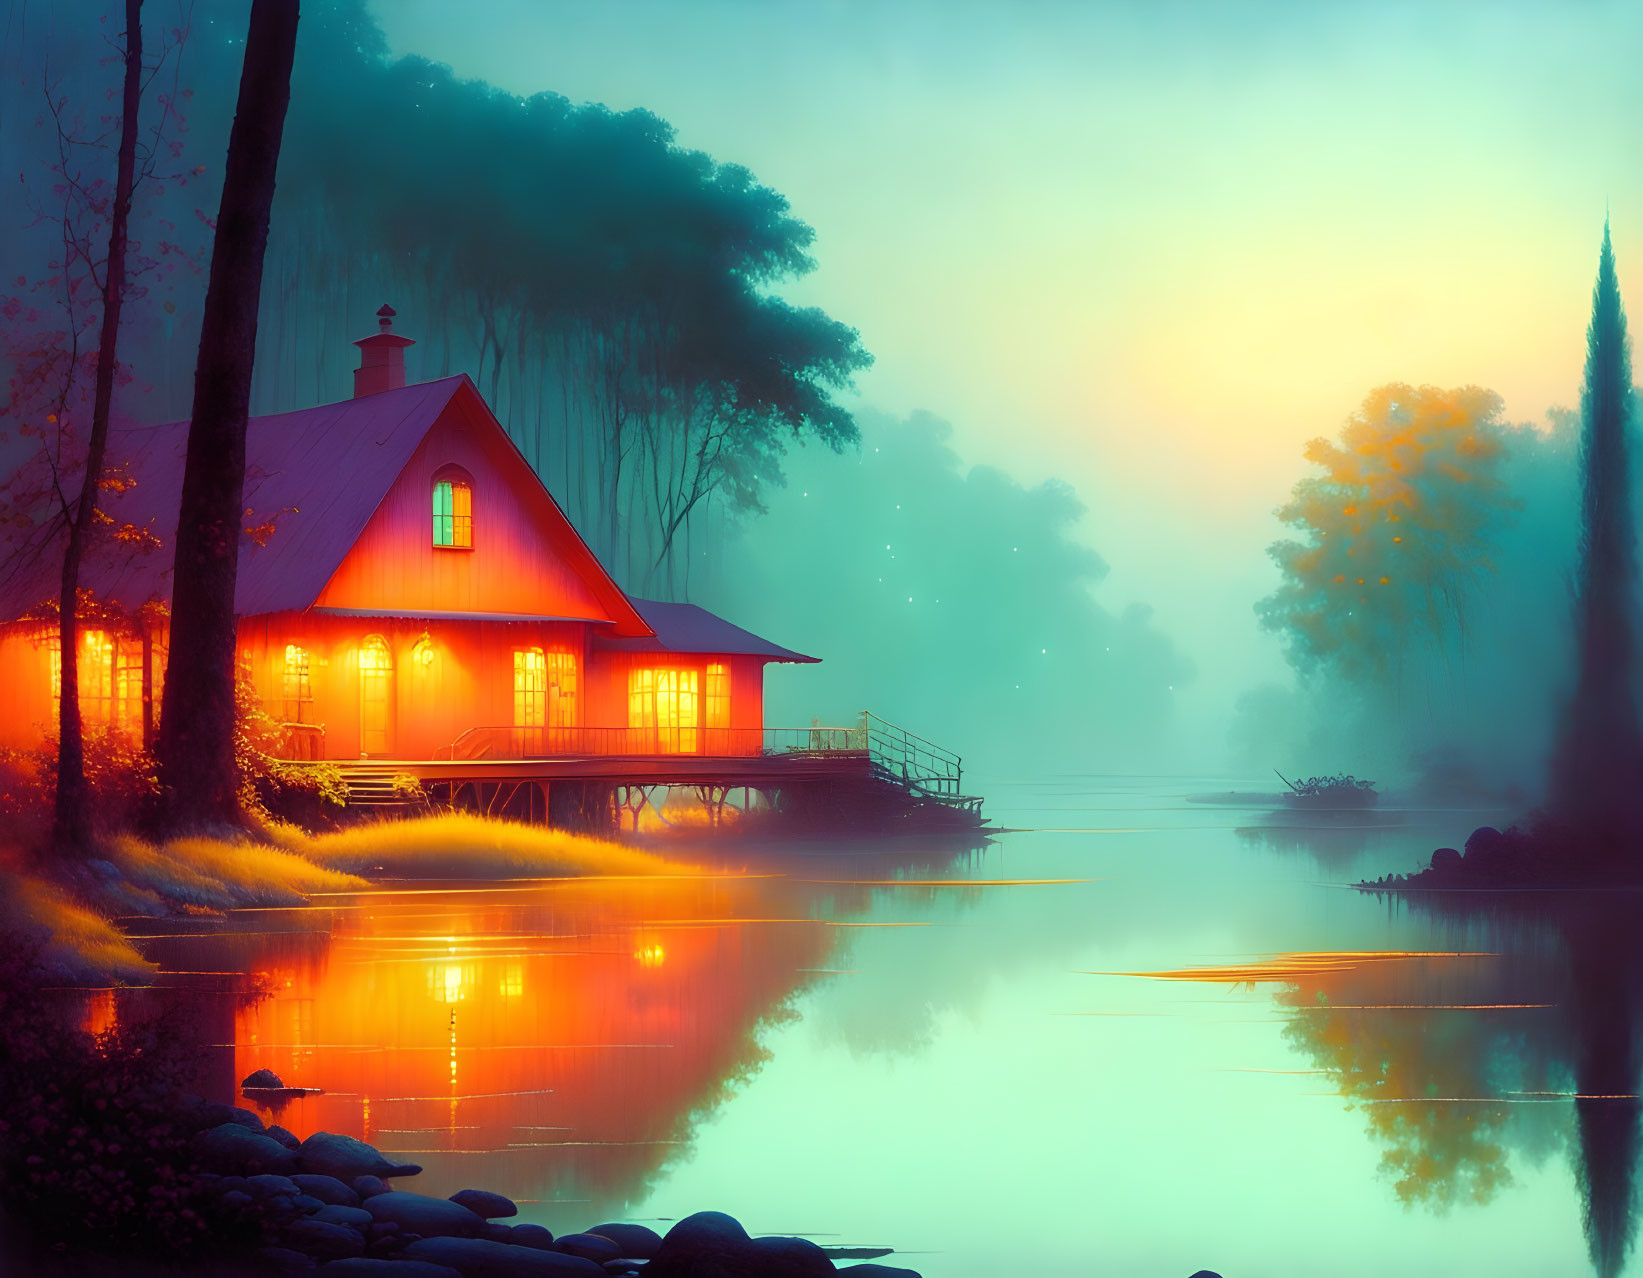 Dreamhouse by the River